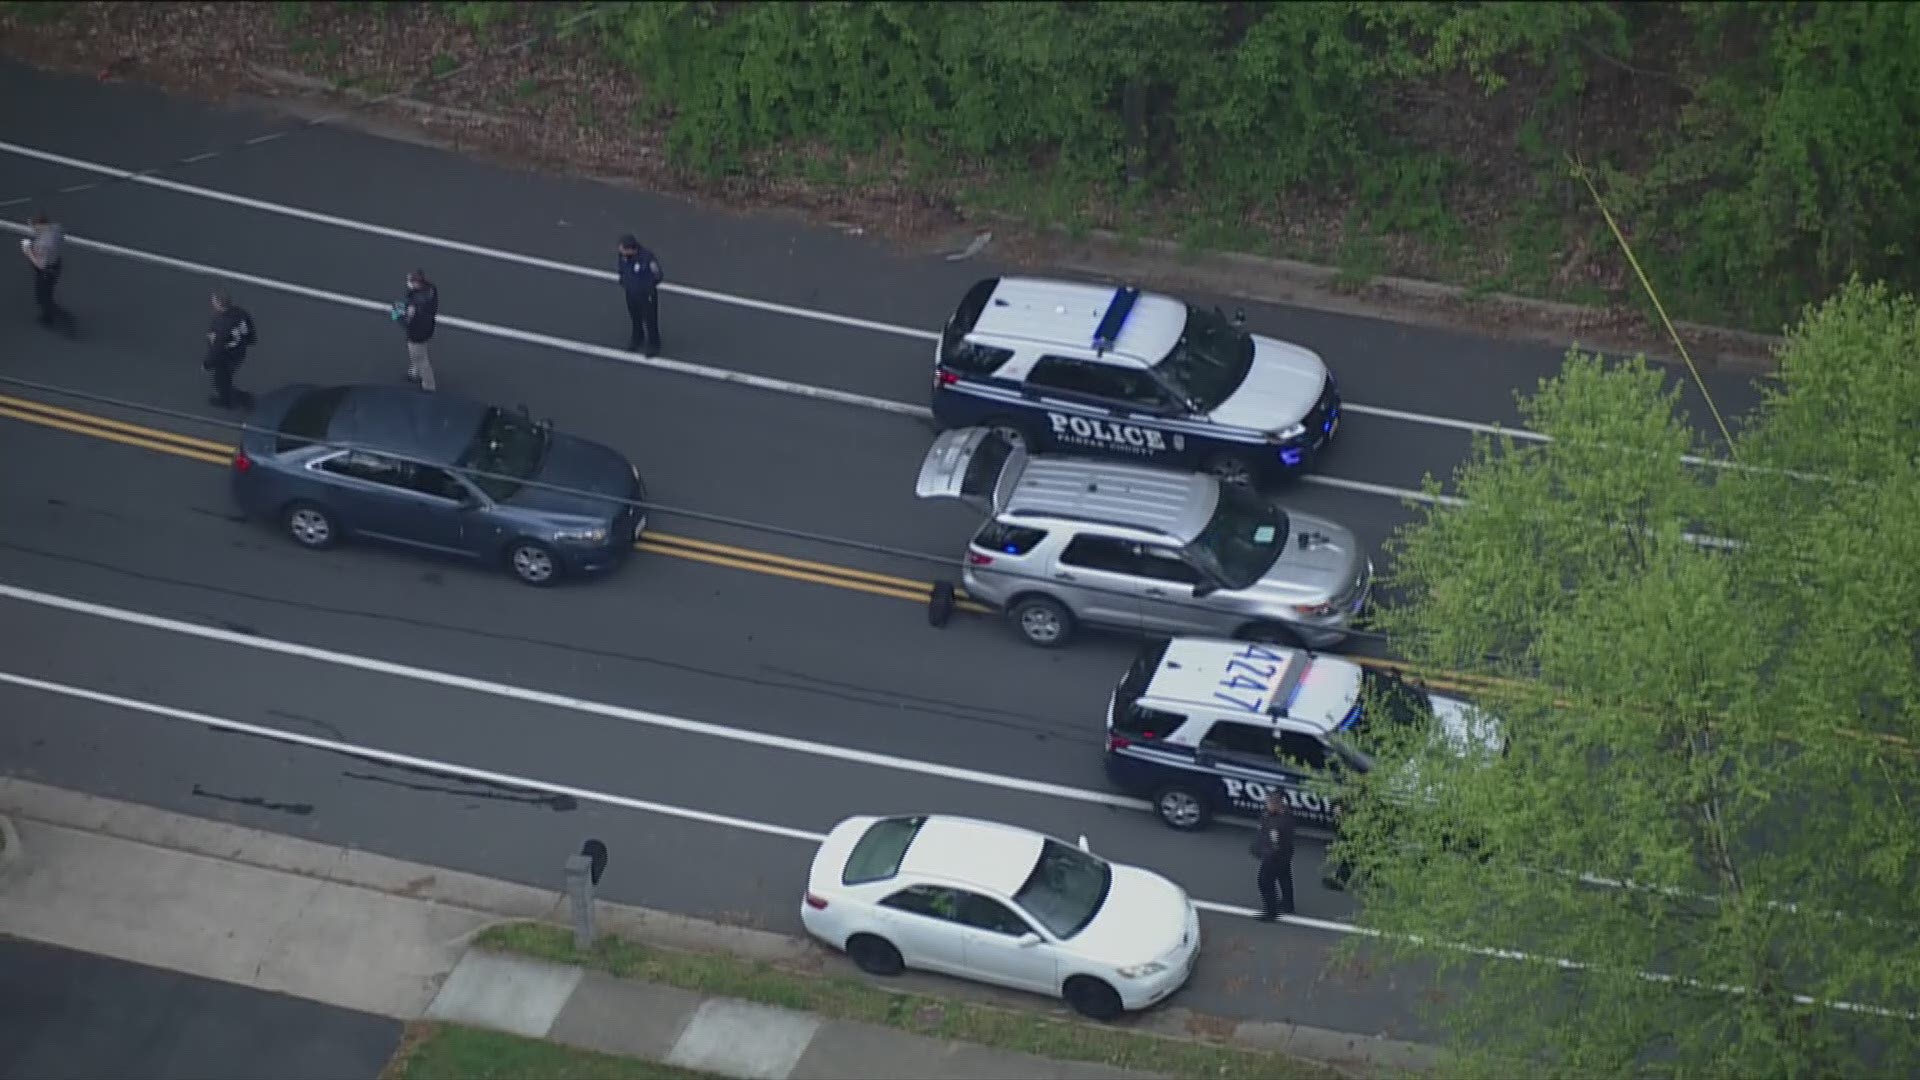 Police are searching for a green four-door vehicle they say struck and killed a person in Fairfax County, Virginia.